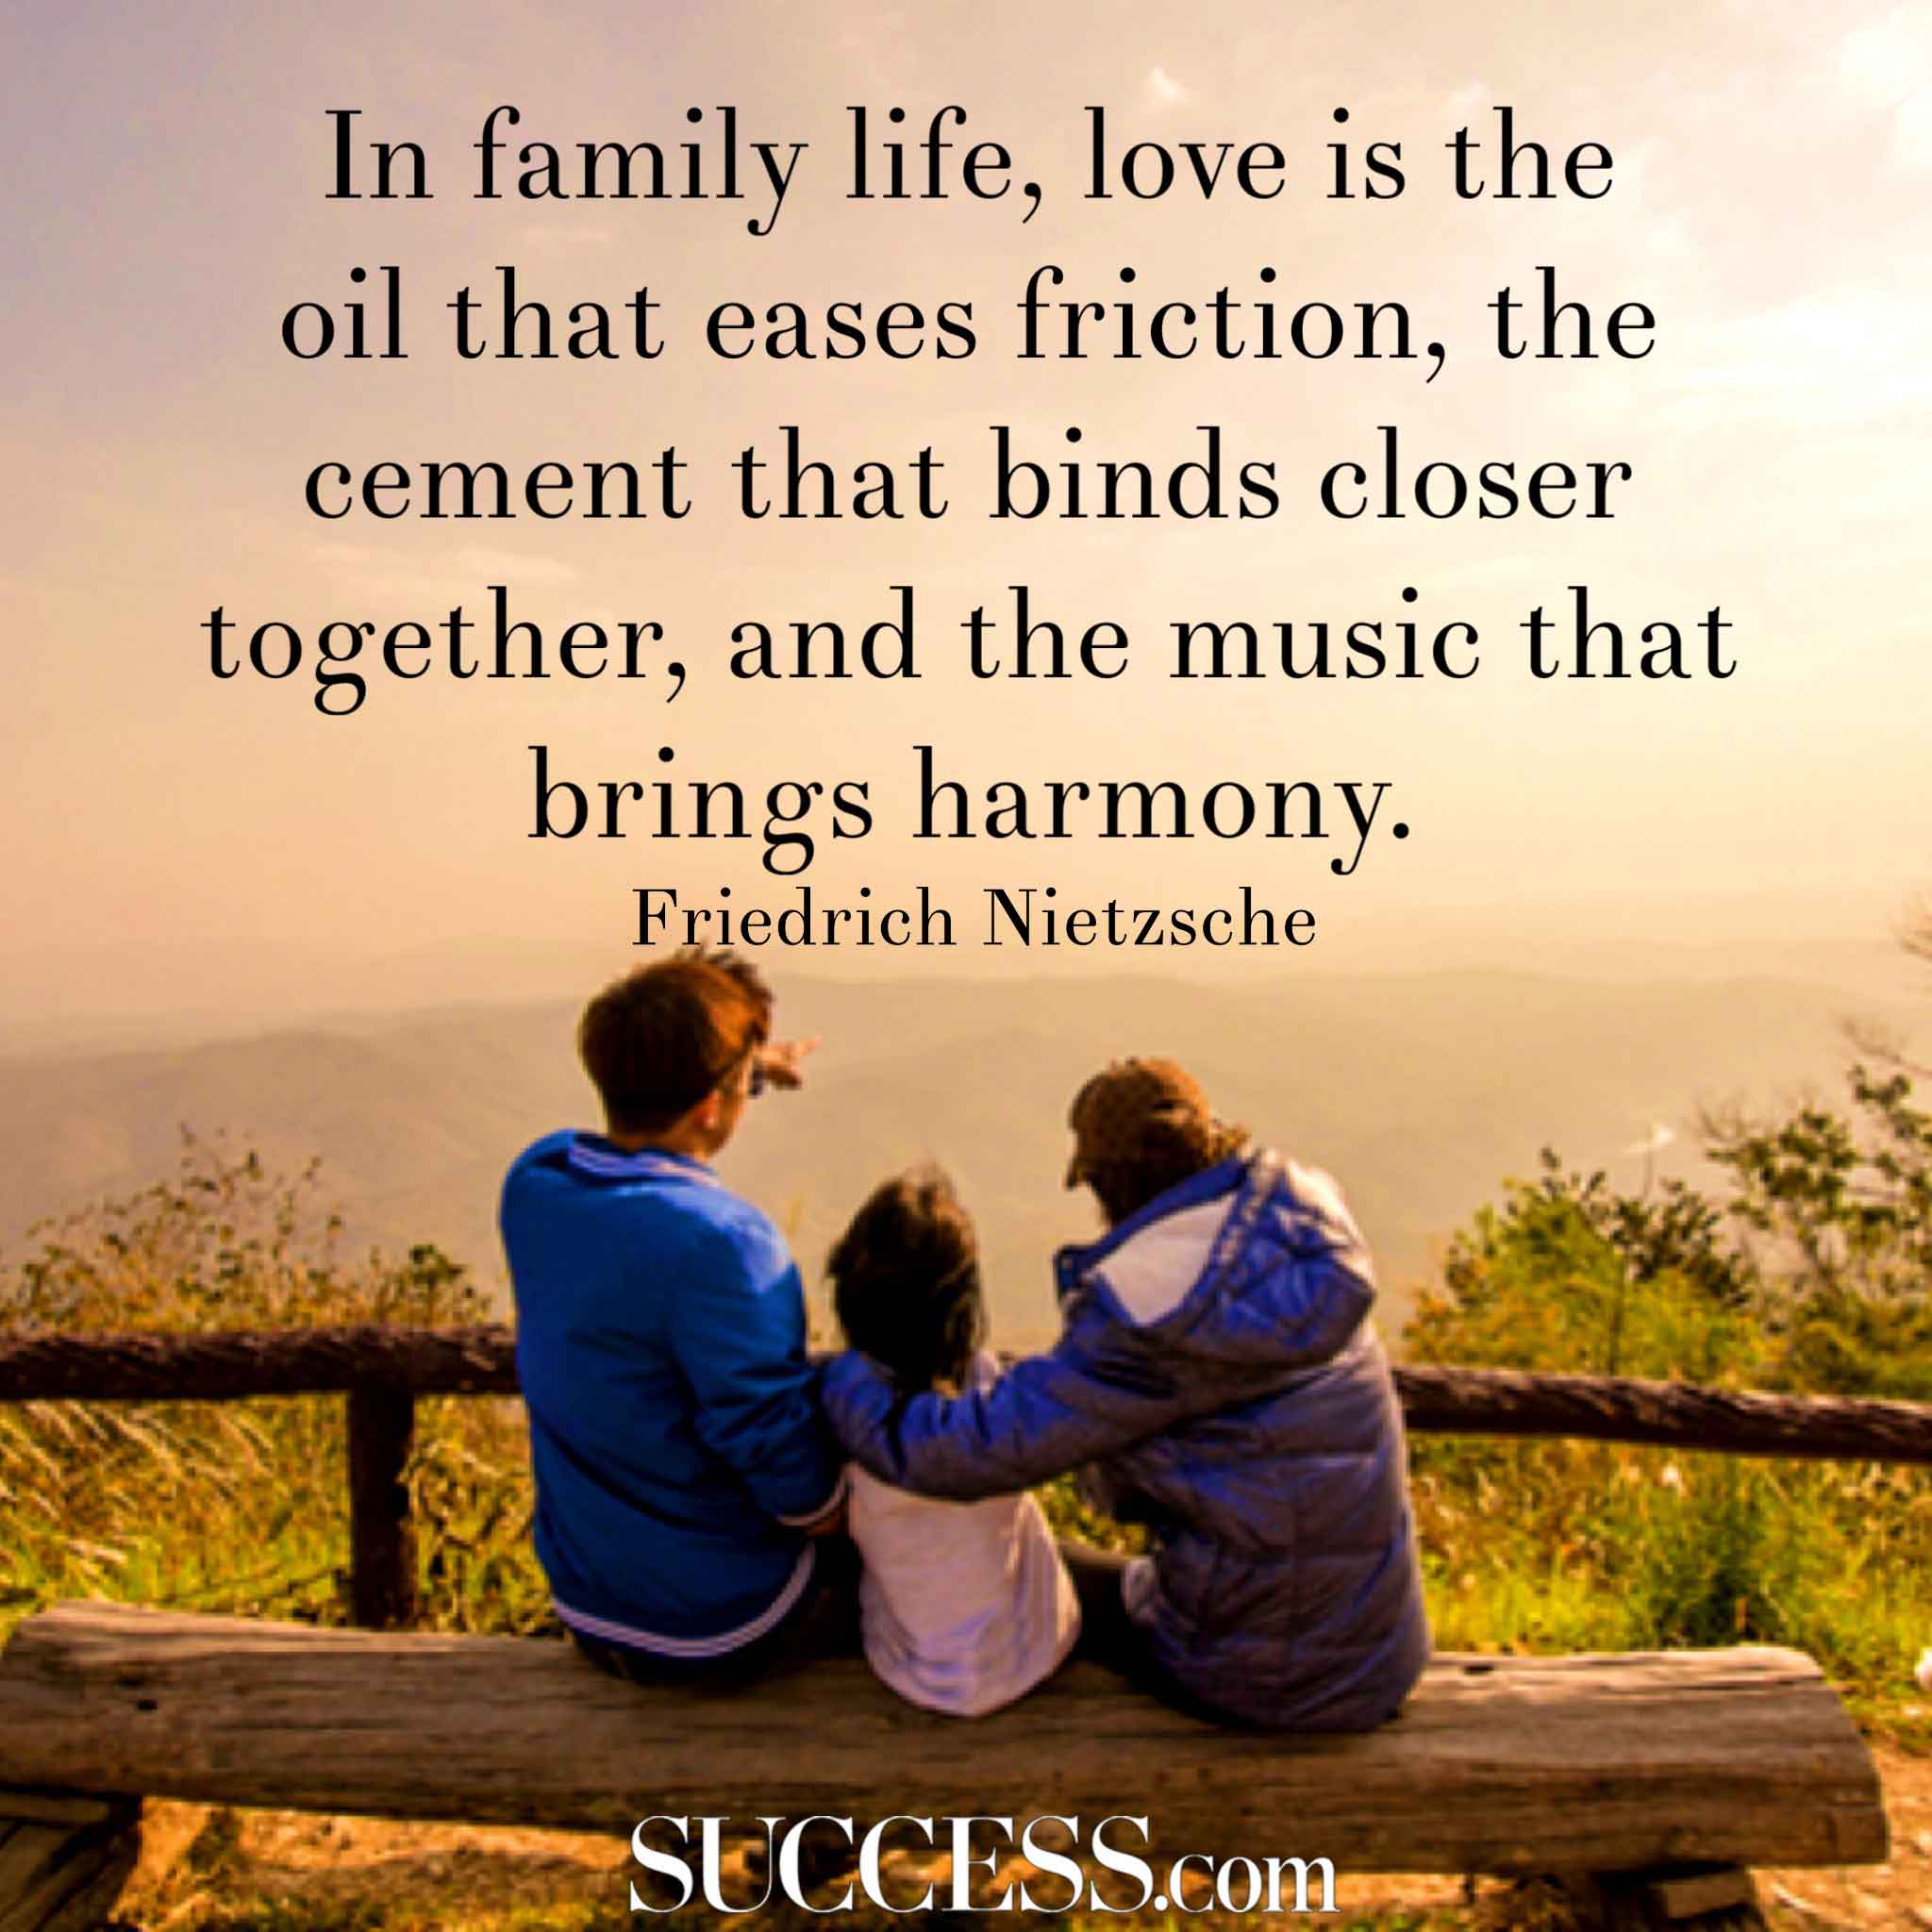 Family Quotes Photo Meaningful Quotes About Family To Share With Your Relatives